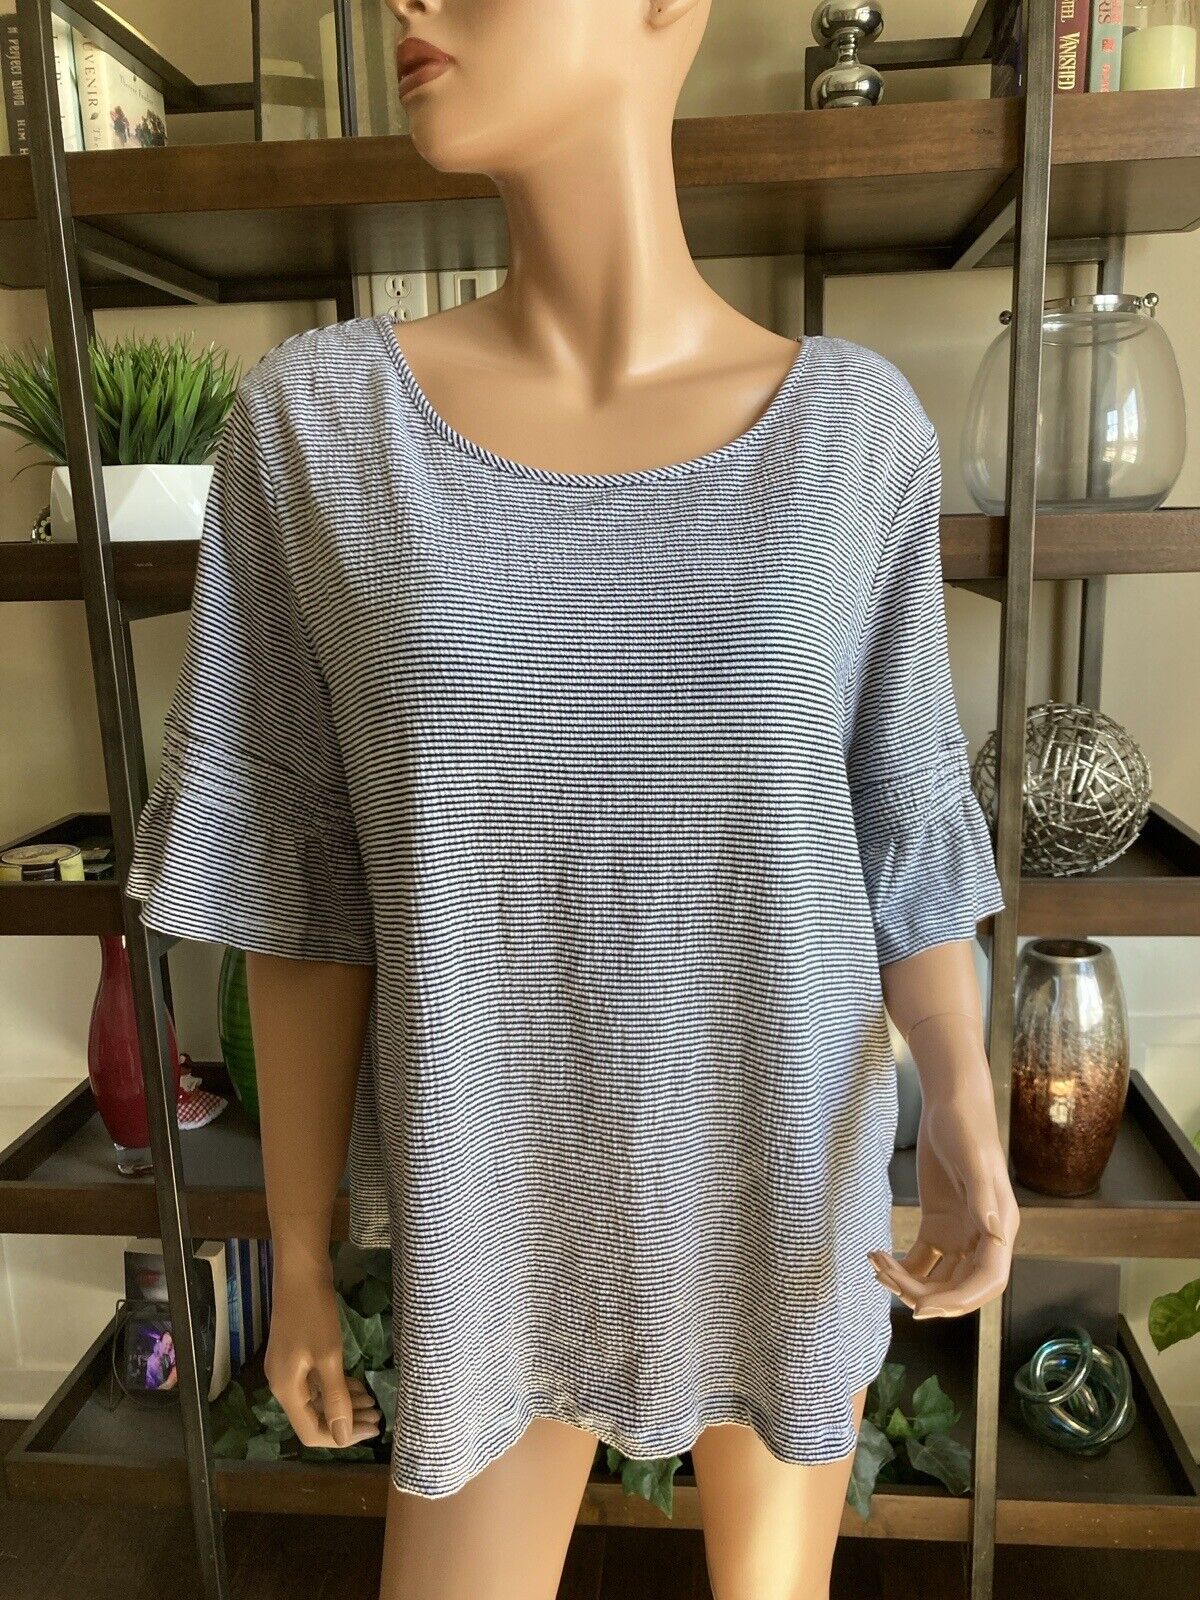 XXL Lauren Conrad casual cute top light gray and black stripe bell sleeves